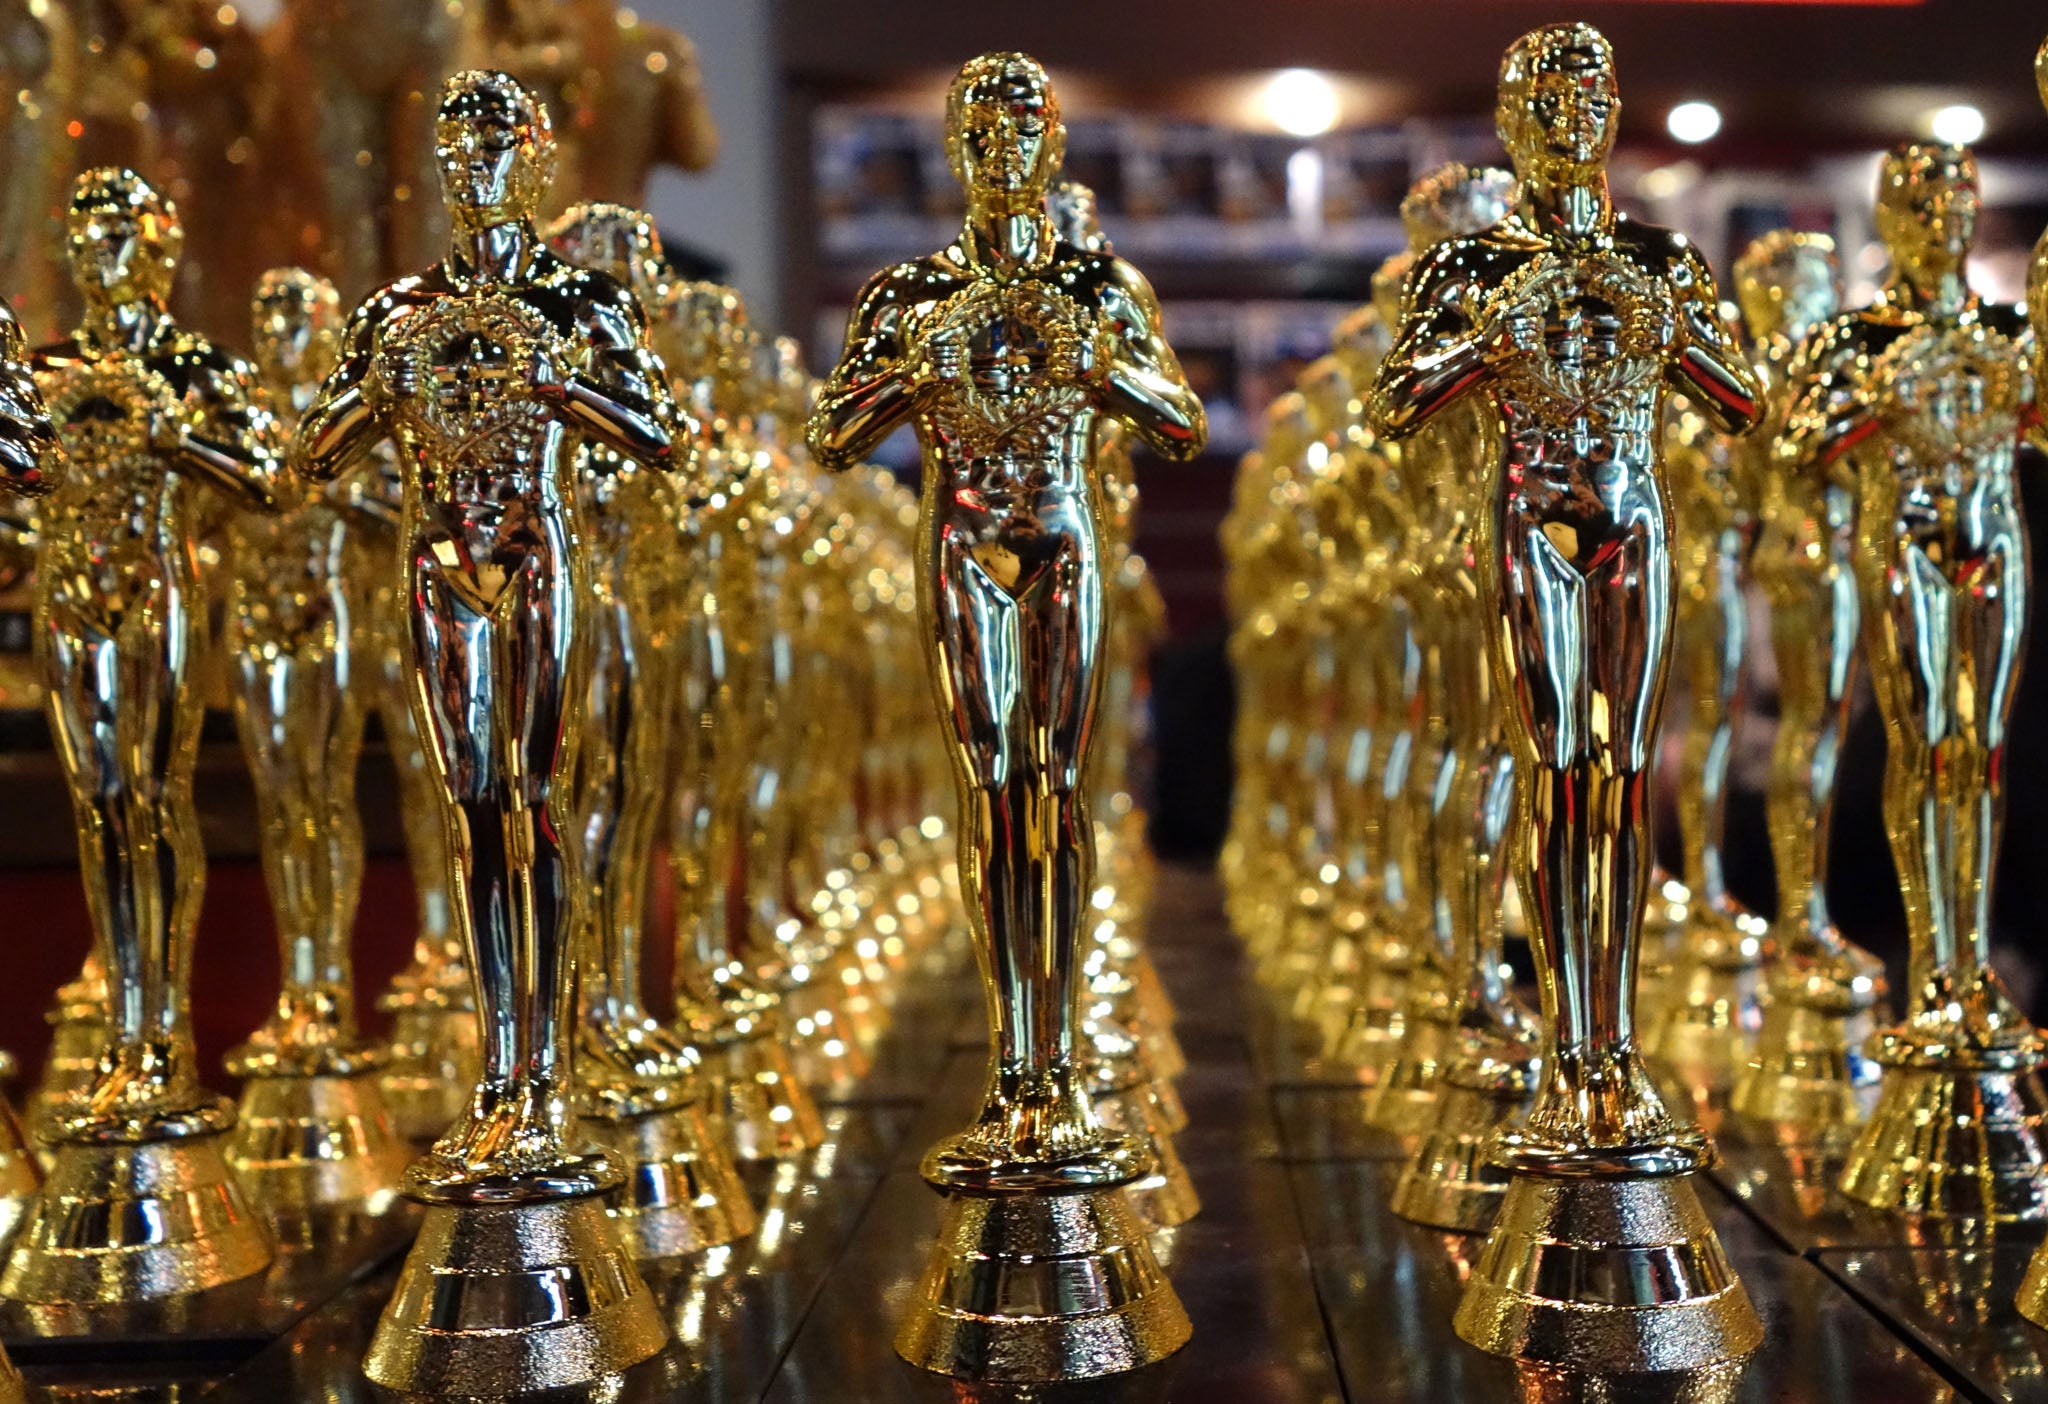 The Oscars 2015 will take place on Sunday 22 February